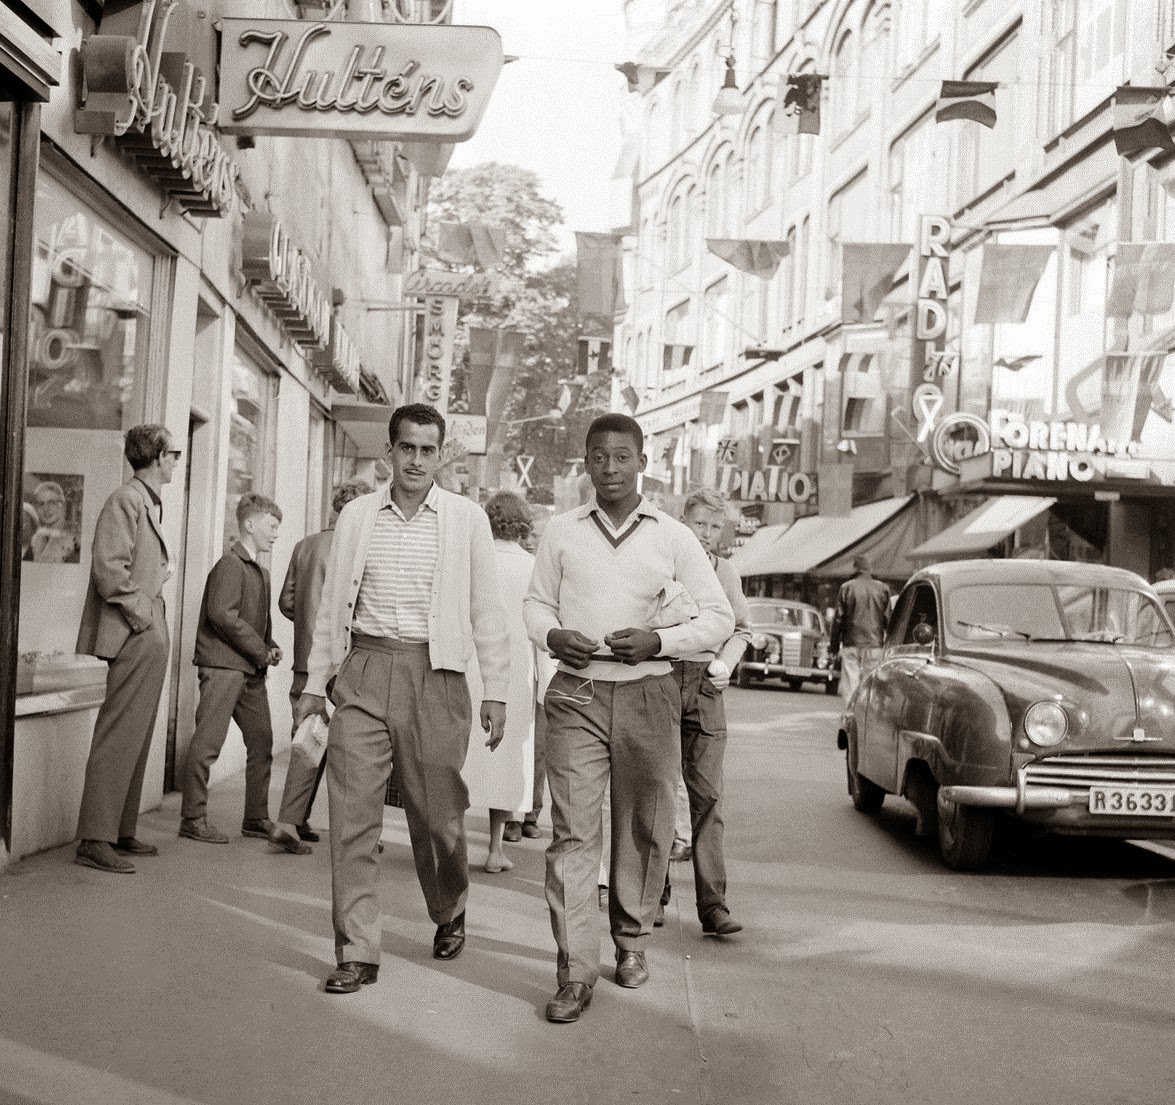 A 17 year-old Pele on a street of Sweden before the 1958 World Cup color